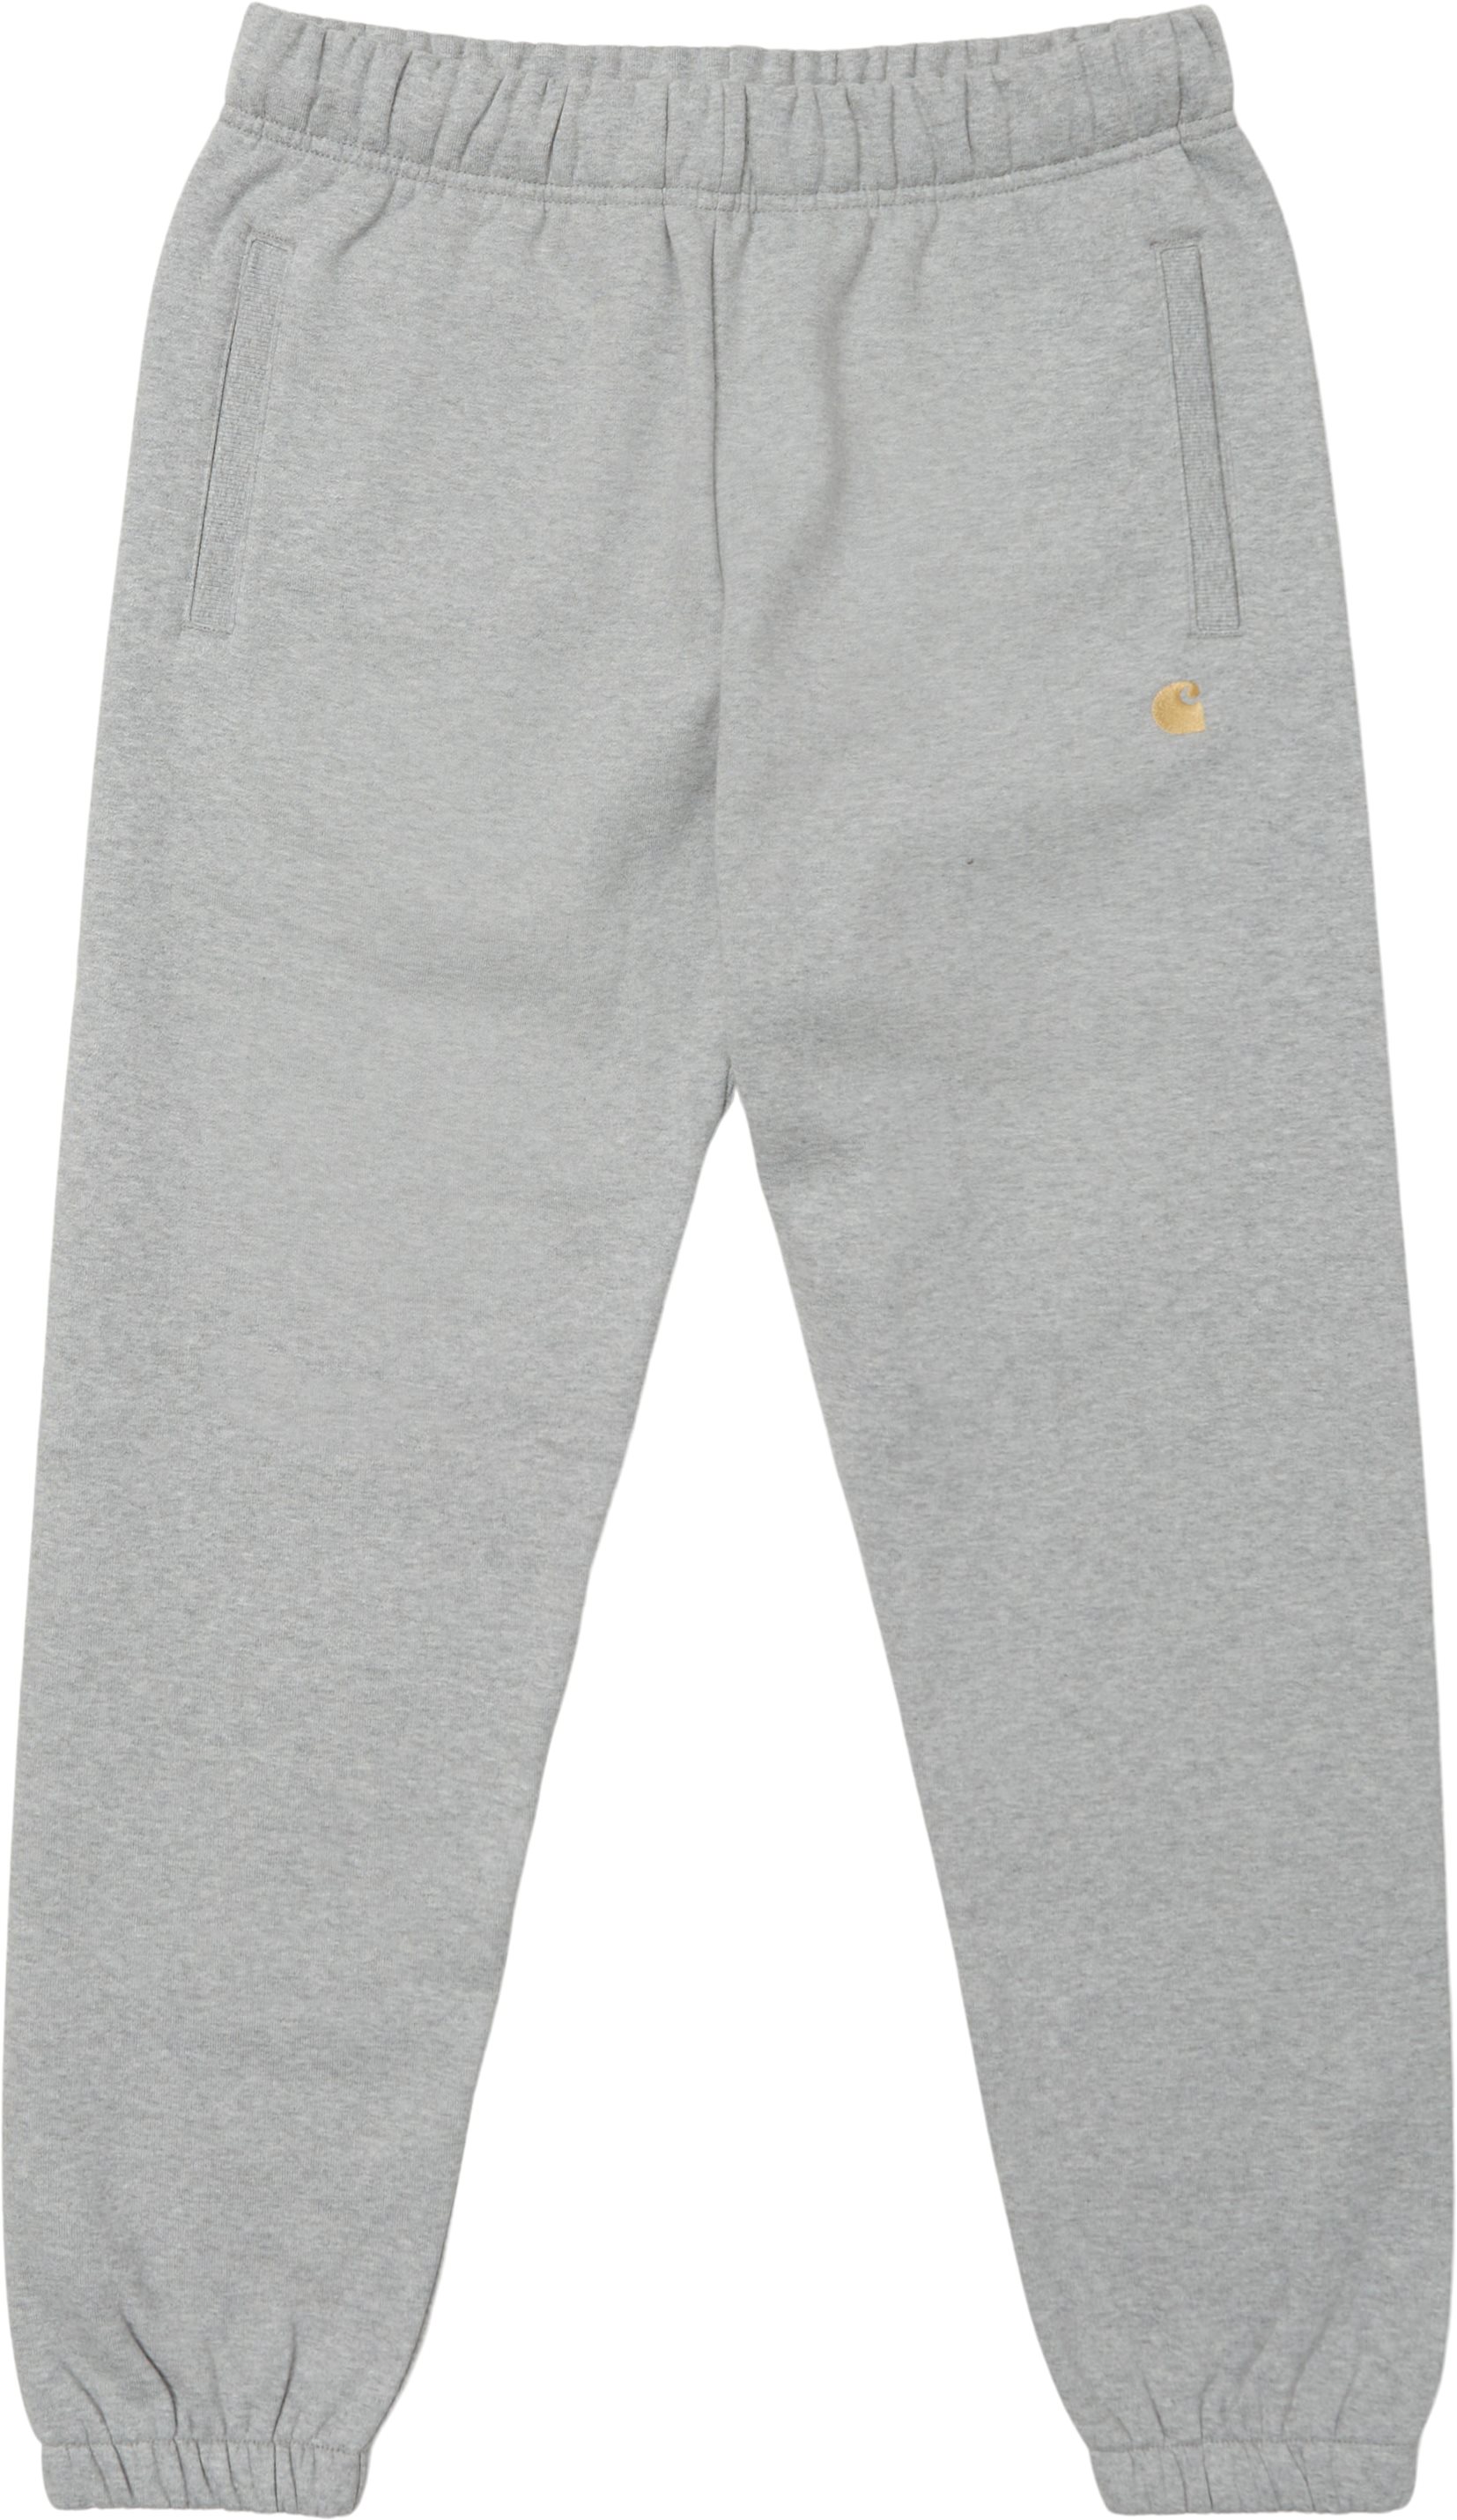 Chase Sweat Pant - Byxor - Loose fit - Grå